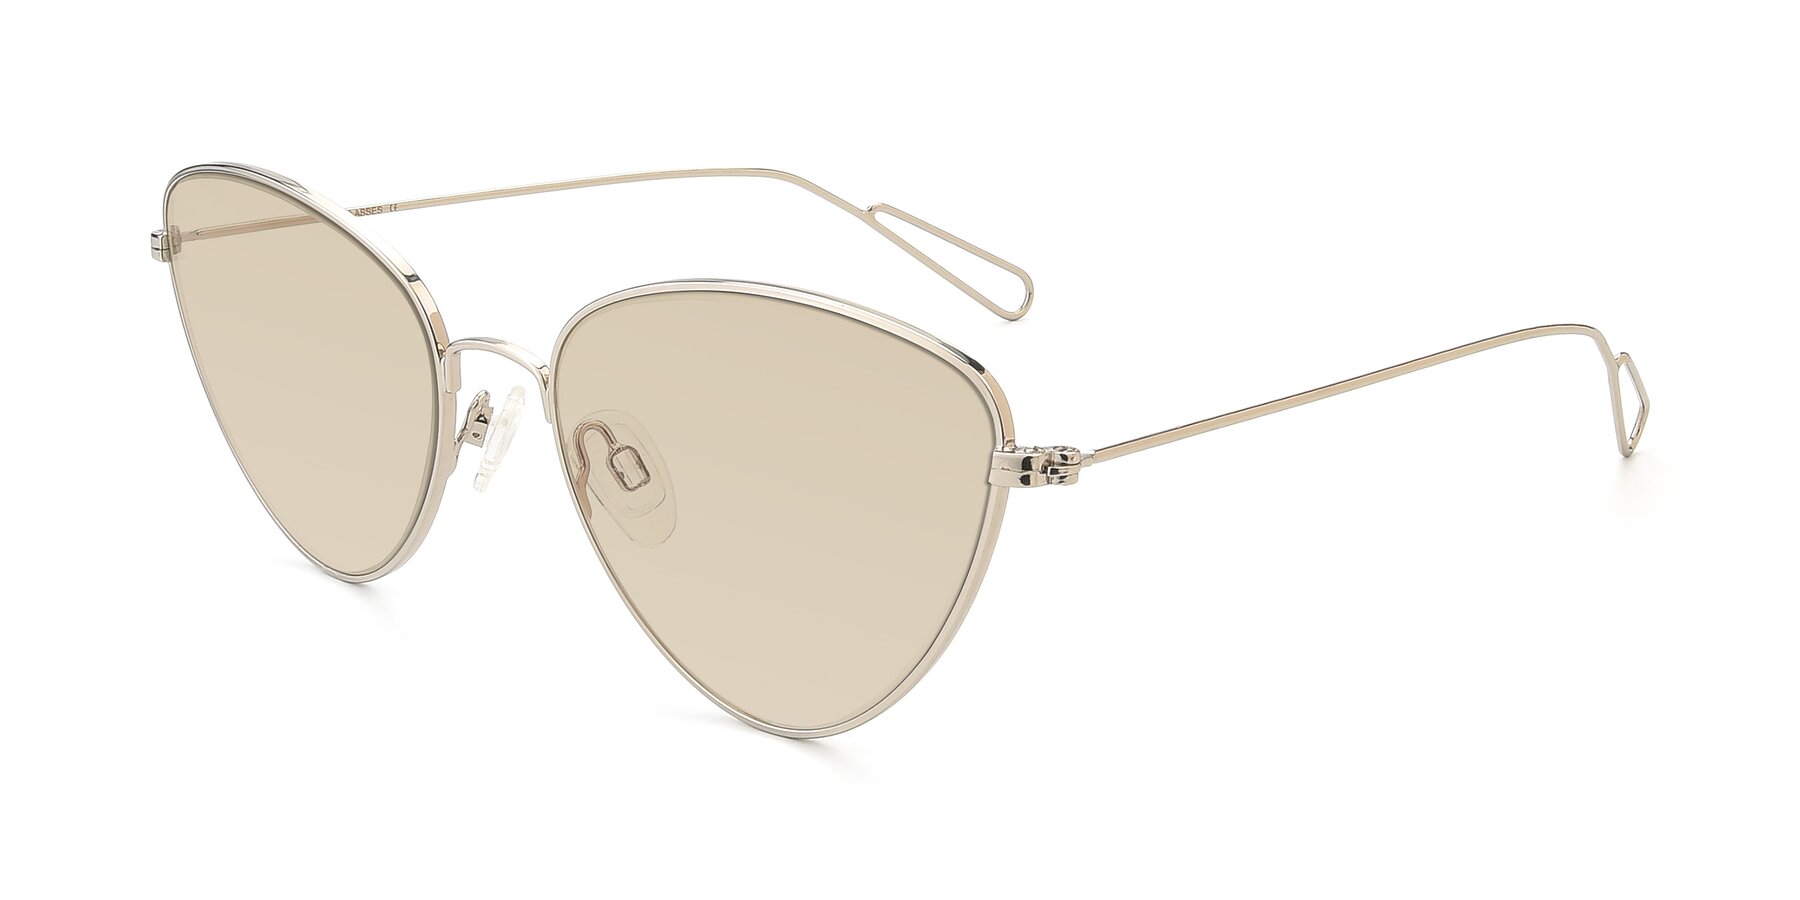 Angle of Butterfly Effect in Silver with Light Brown Tinted Lenses